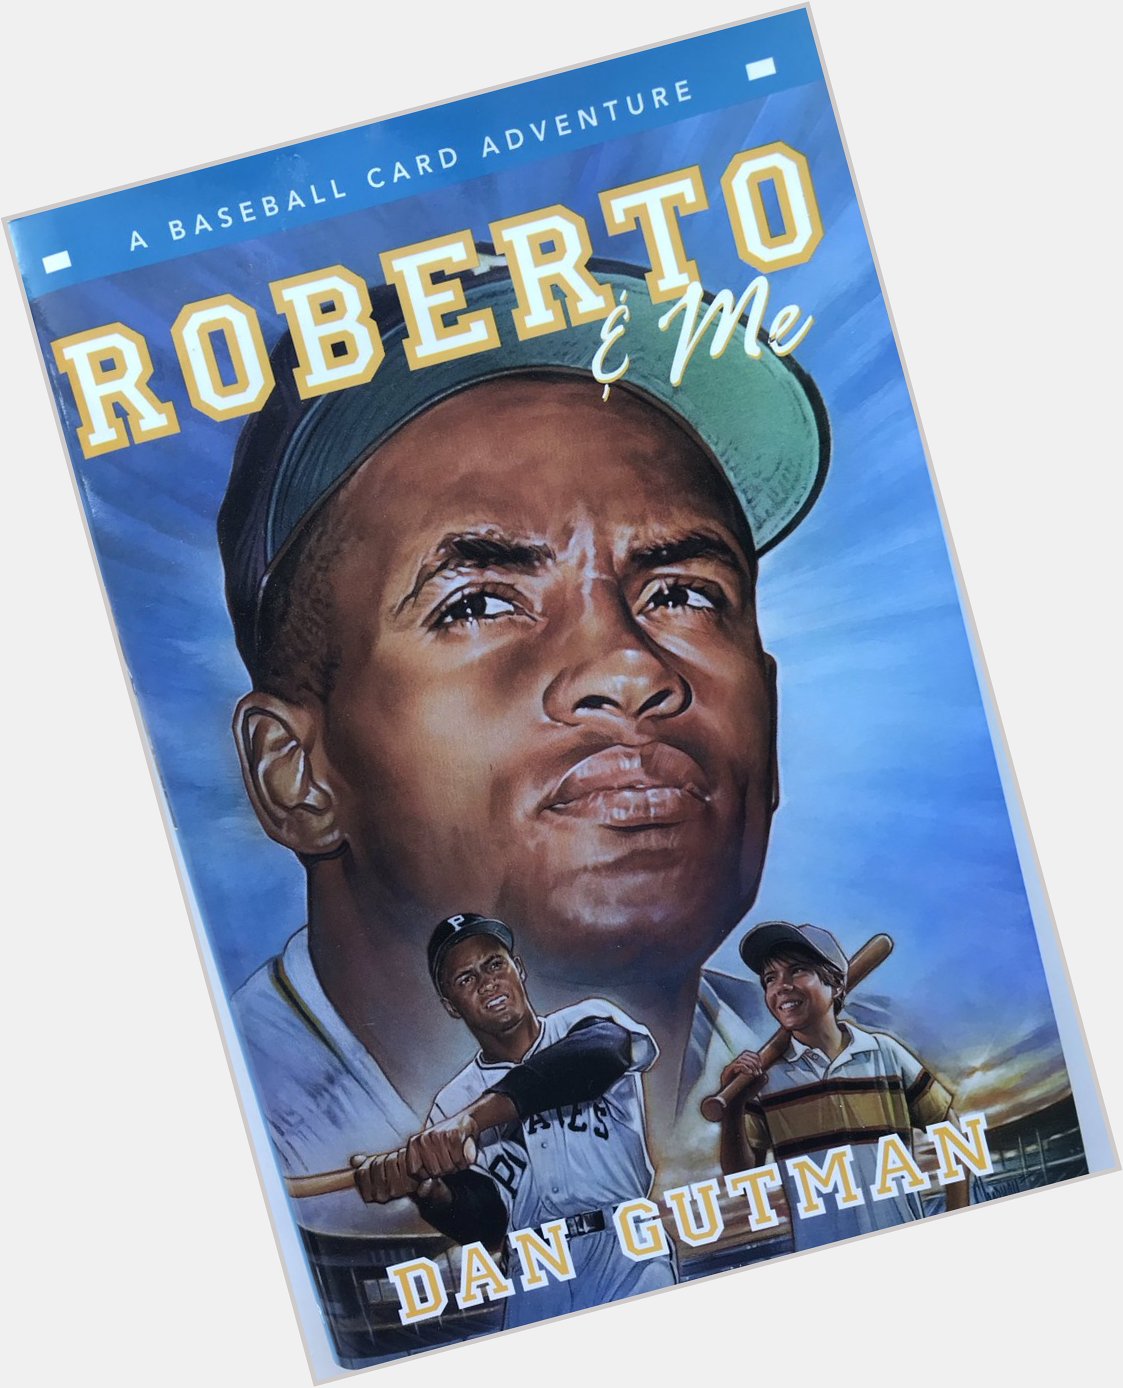 Happy birthday to the great Roberto Clemente, who would have been 88 today. 